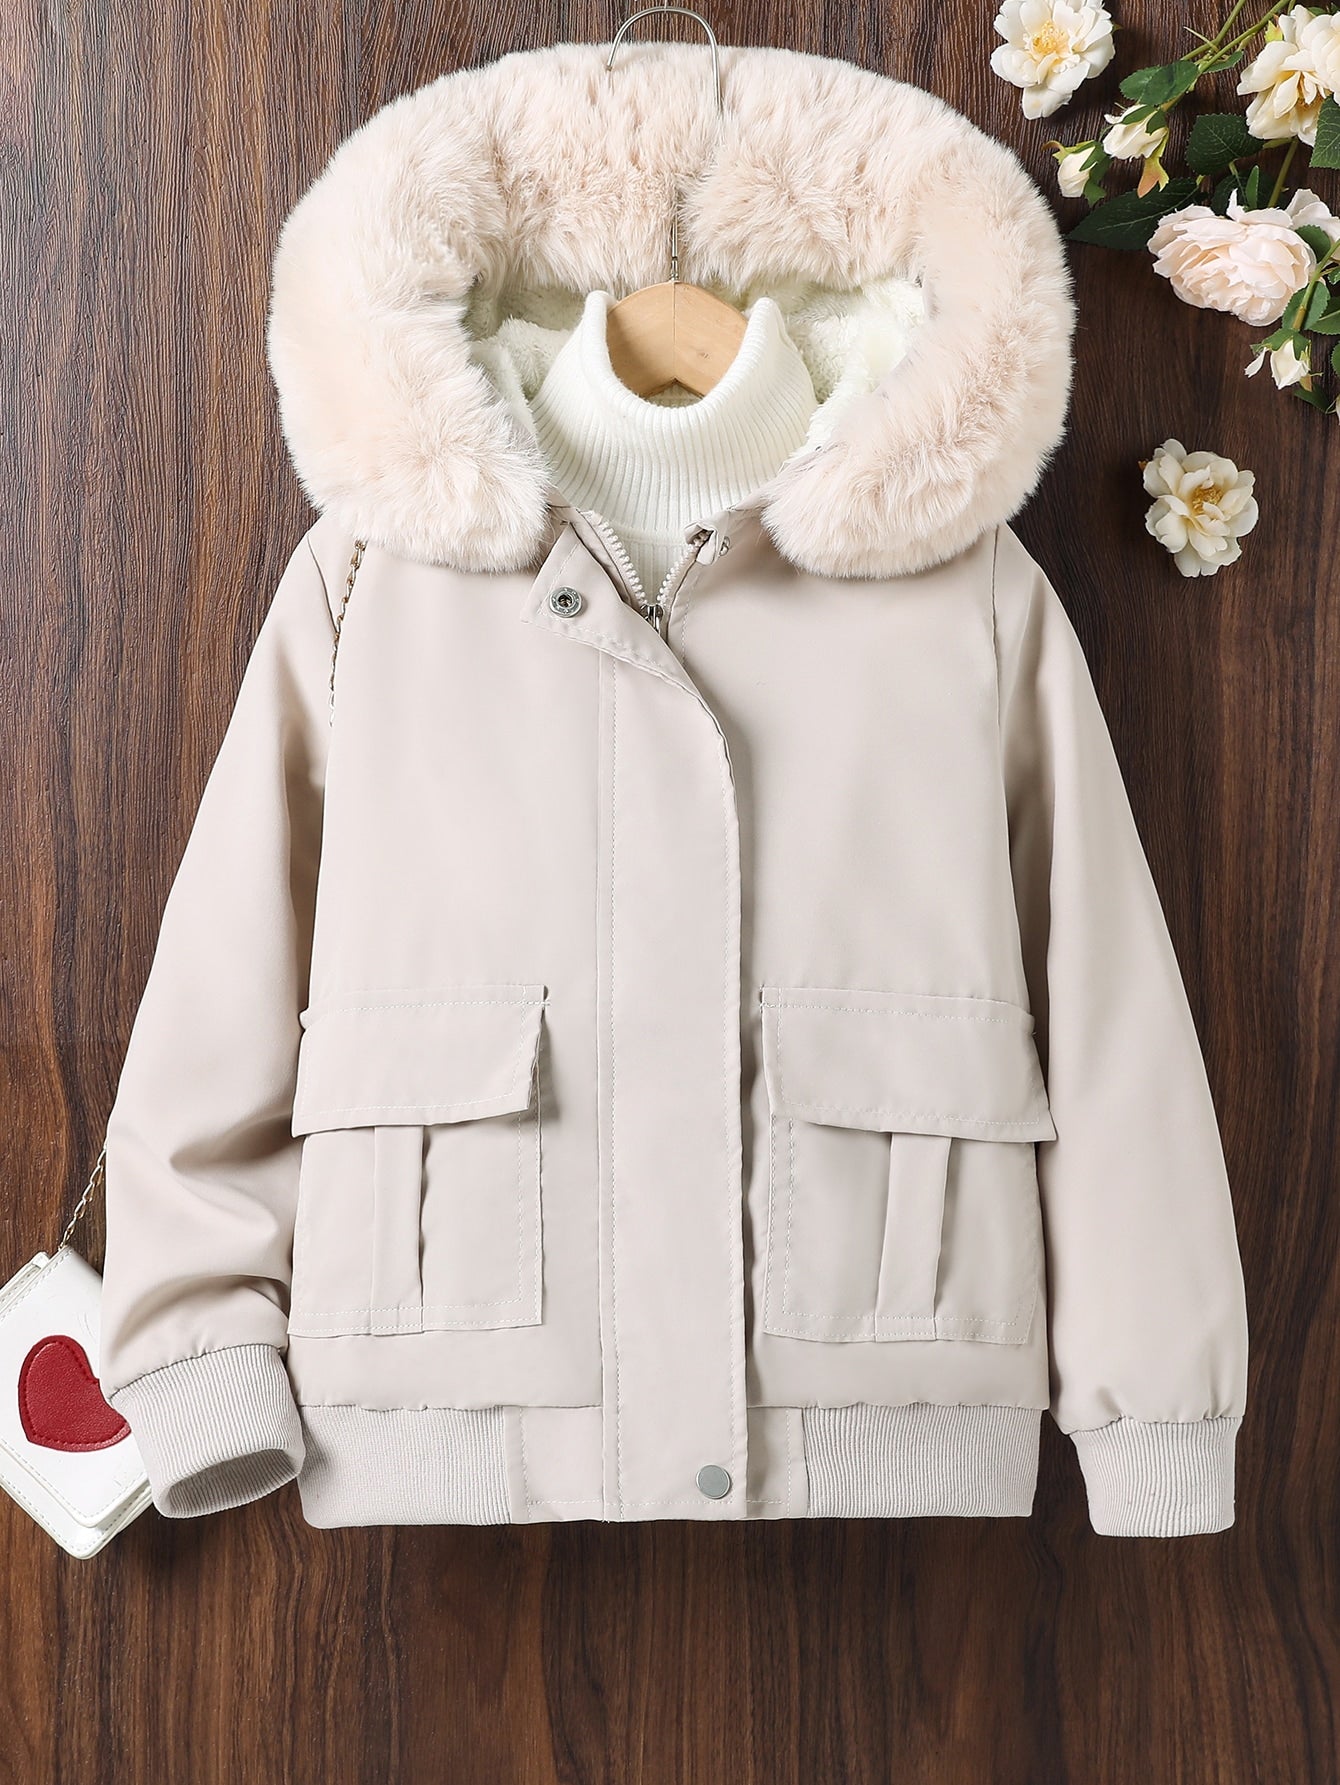 Tween Girl Teddy Lined Fuzzy Trim Hooded Jacket Without Sweater